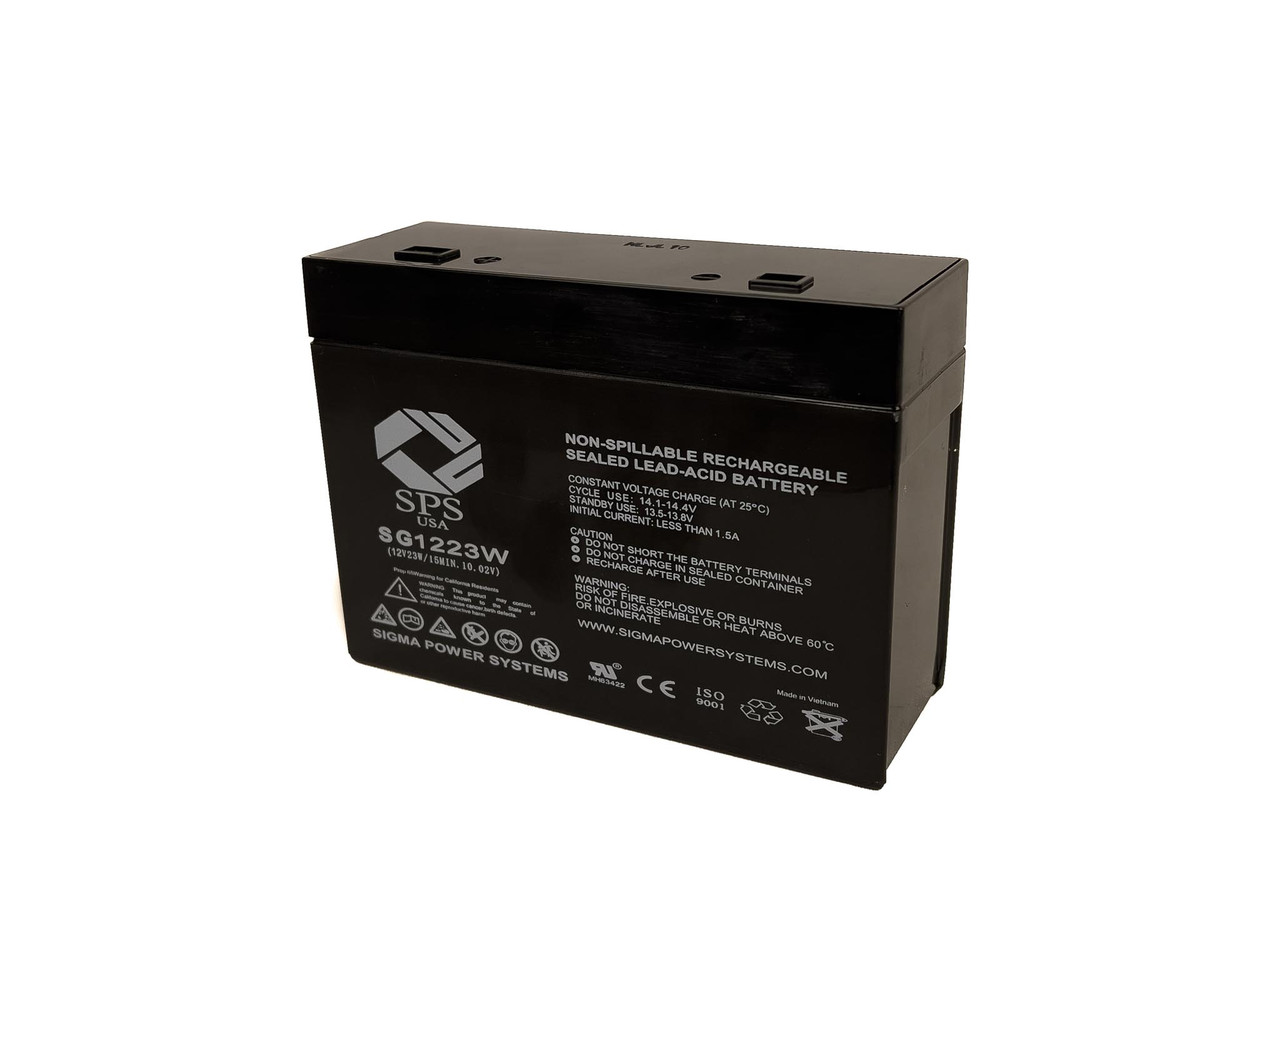 Raion Power 12V 5.2Ah 23W Non-Spillable Replacement Battery for FirstPower FP1250A